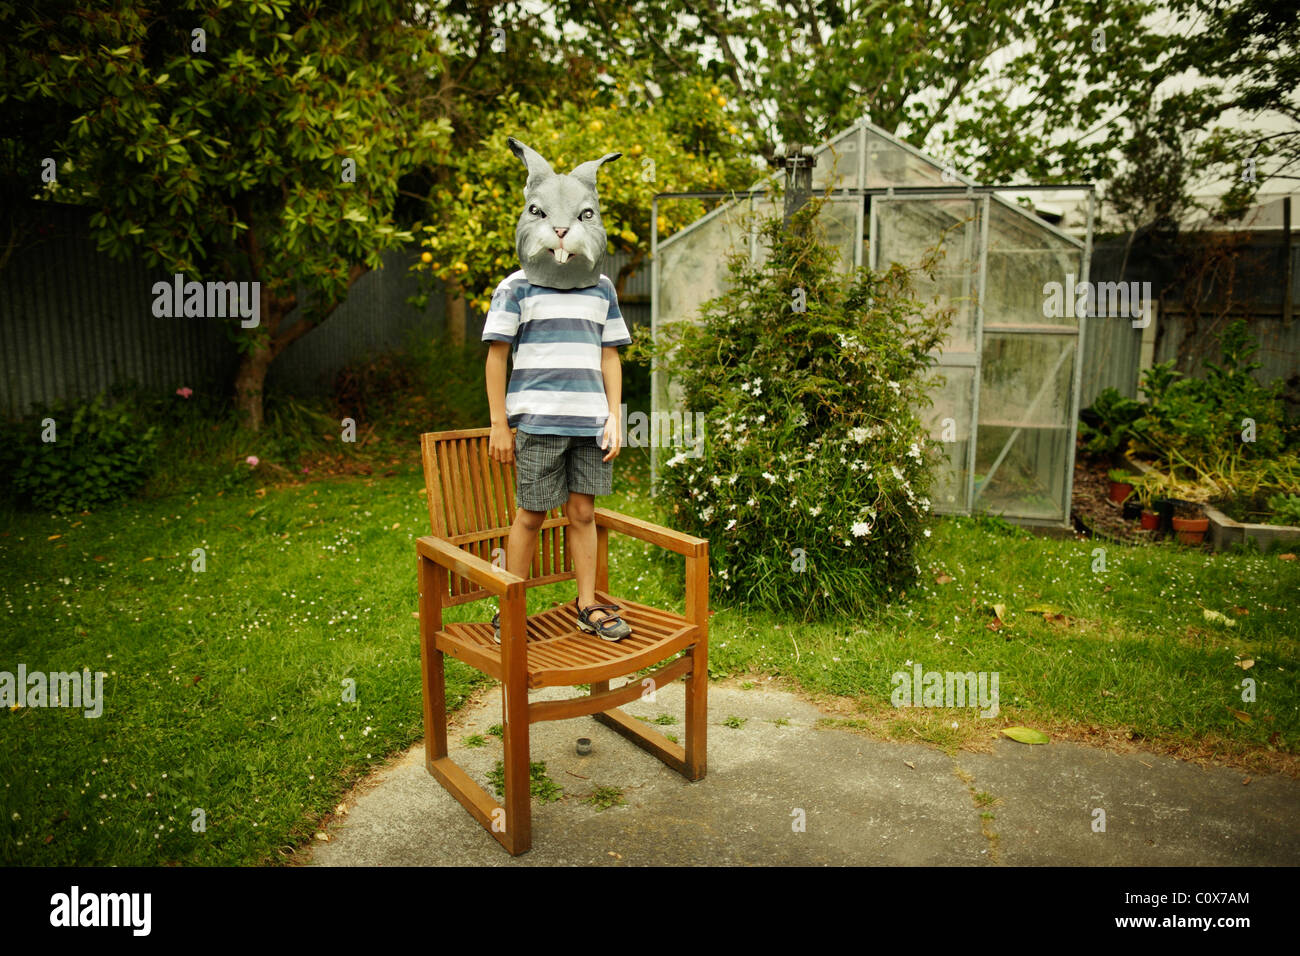 Boy with rabbit mask stands on chair in garden Stock Photo